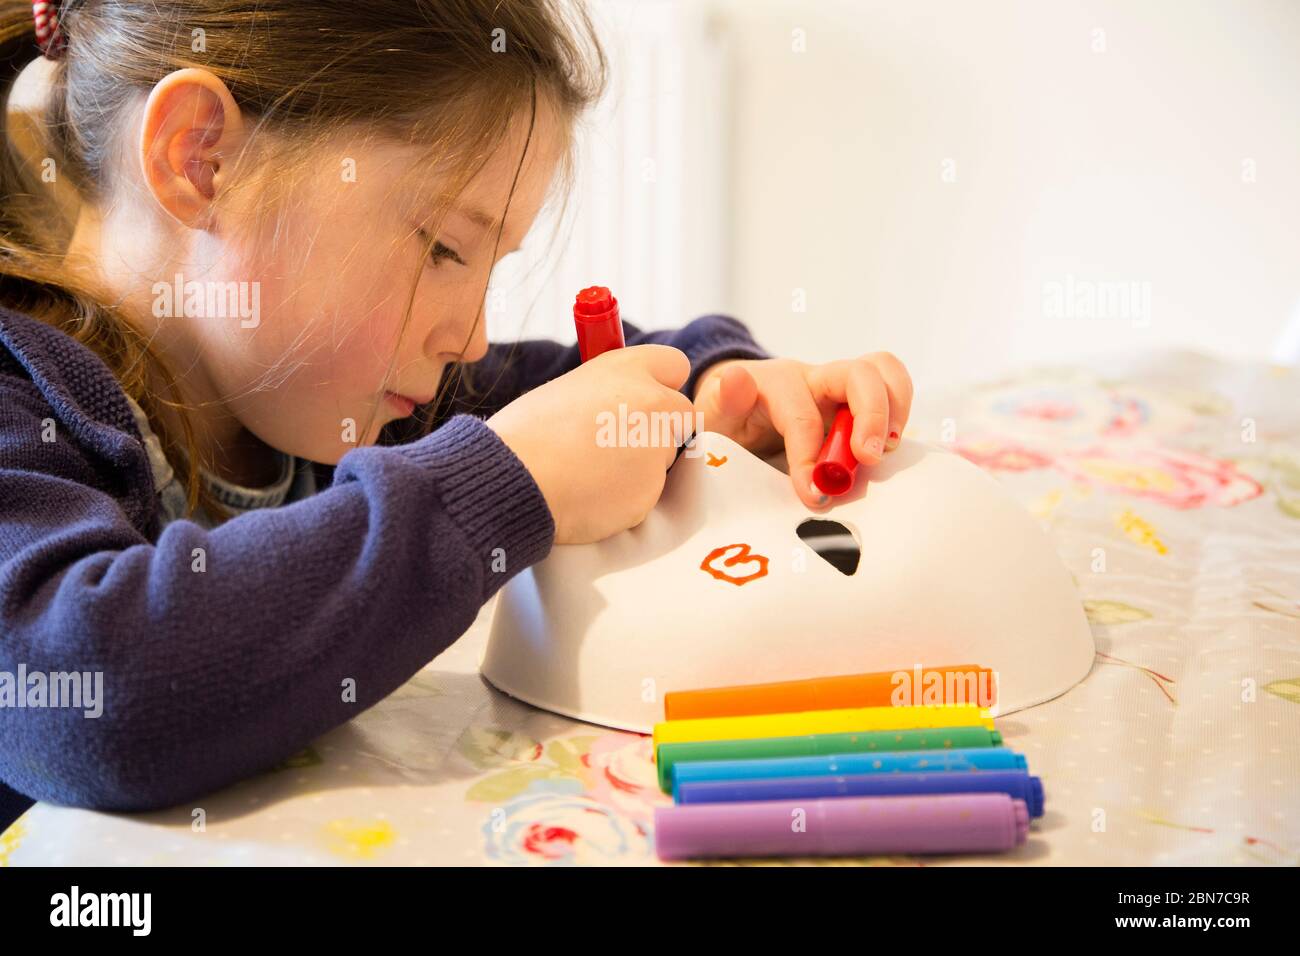 young girl drawing on a face mask Stock Photo